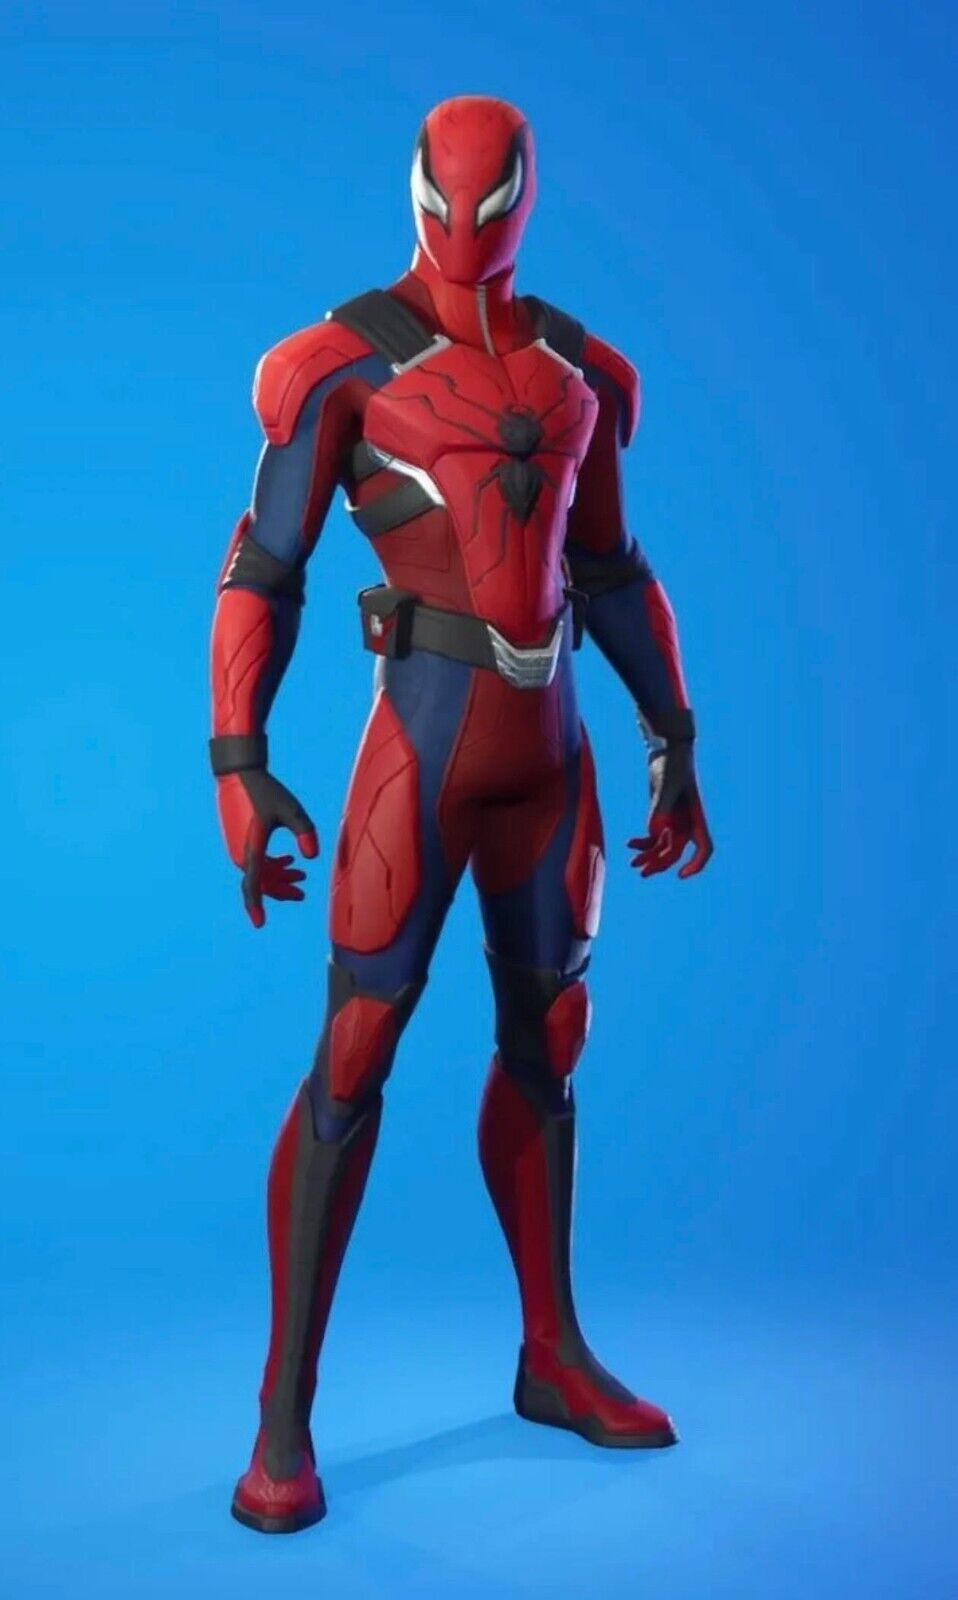 FORTNITE X Marvel Zero War #1 🕷Spider-Man🕷 Outfit DLC 🔥 CODE ONLY 🔥